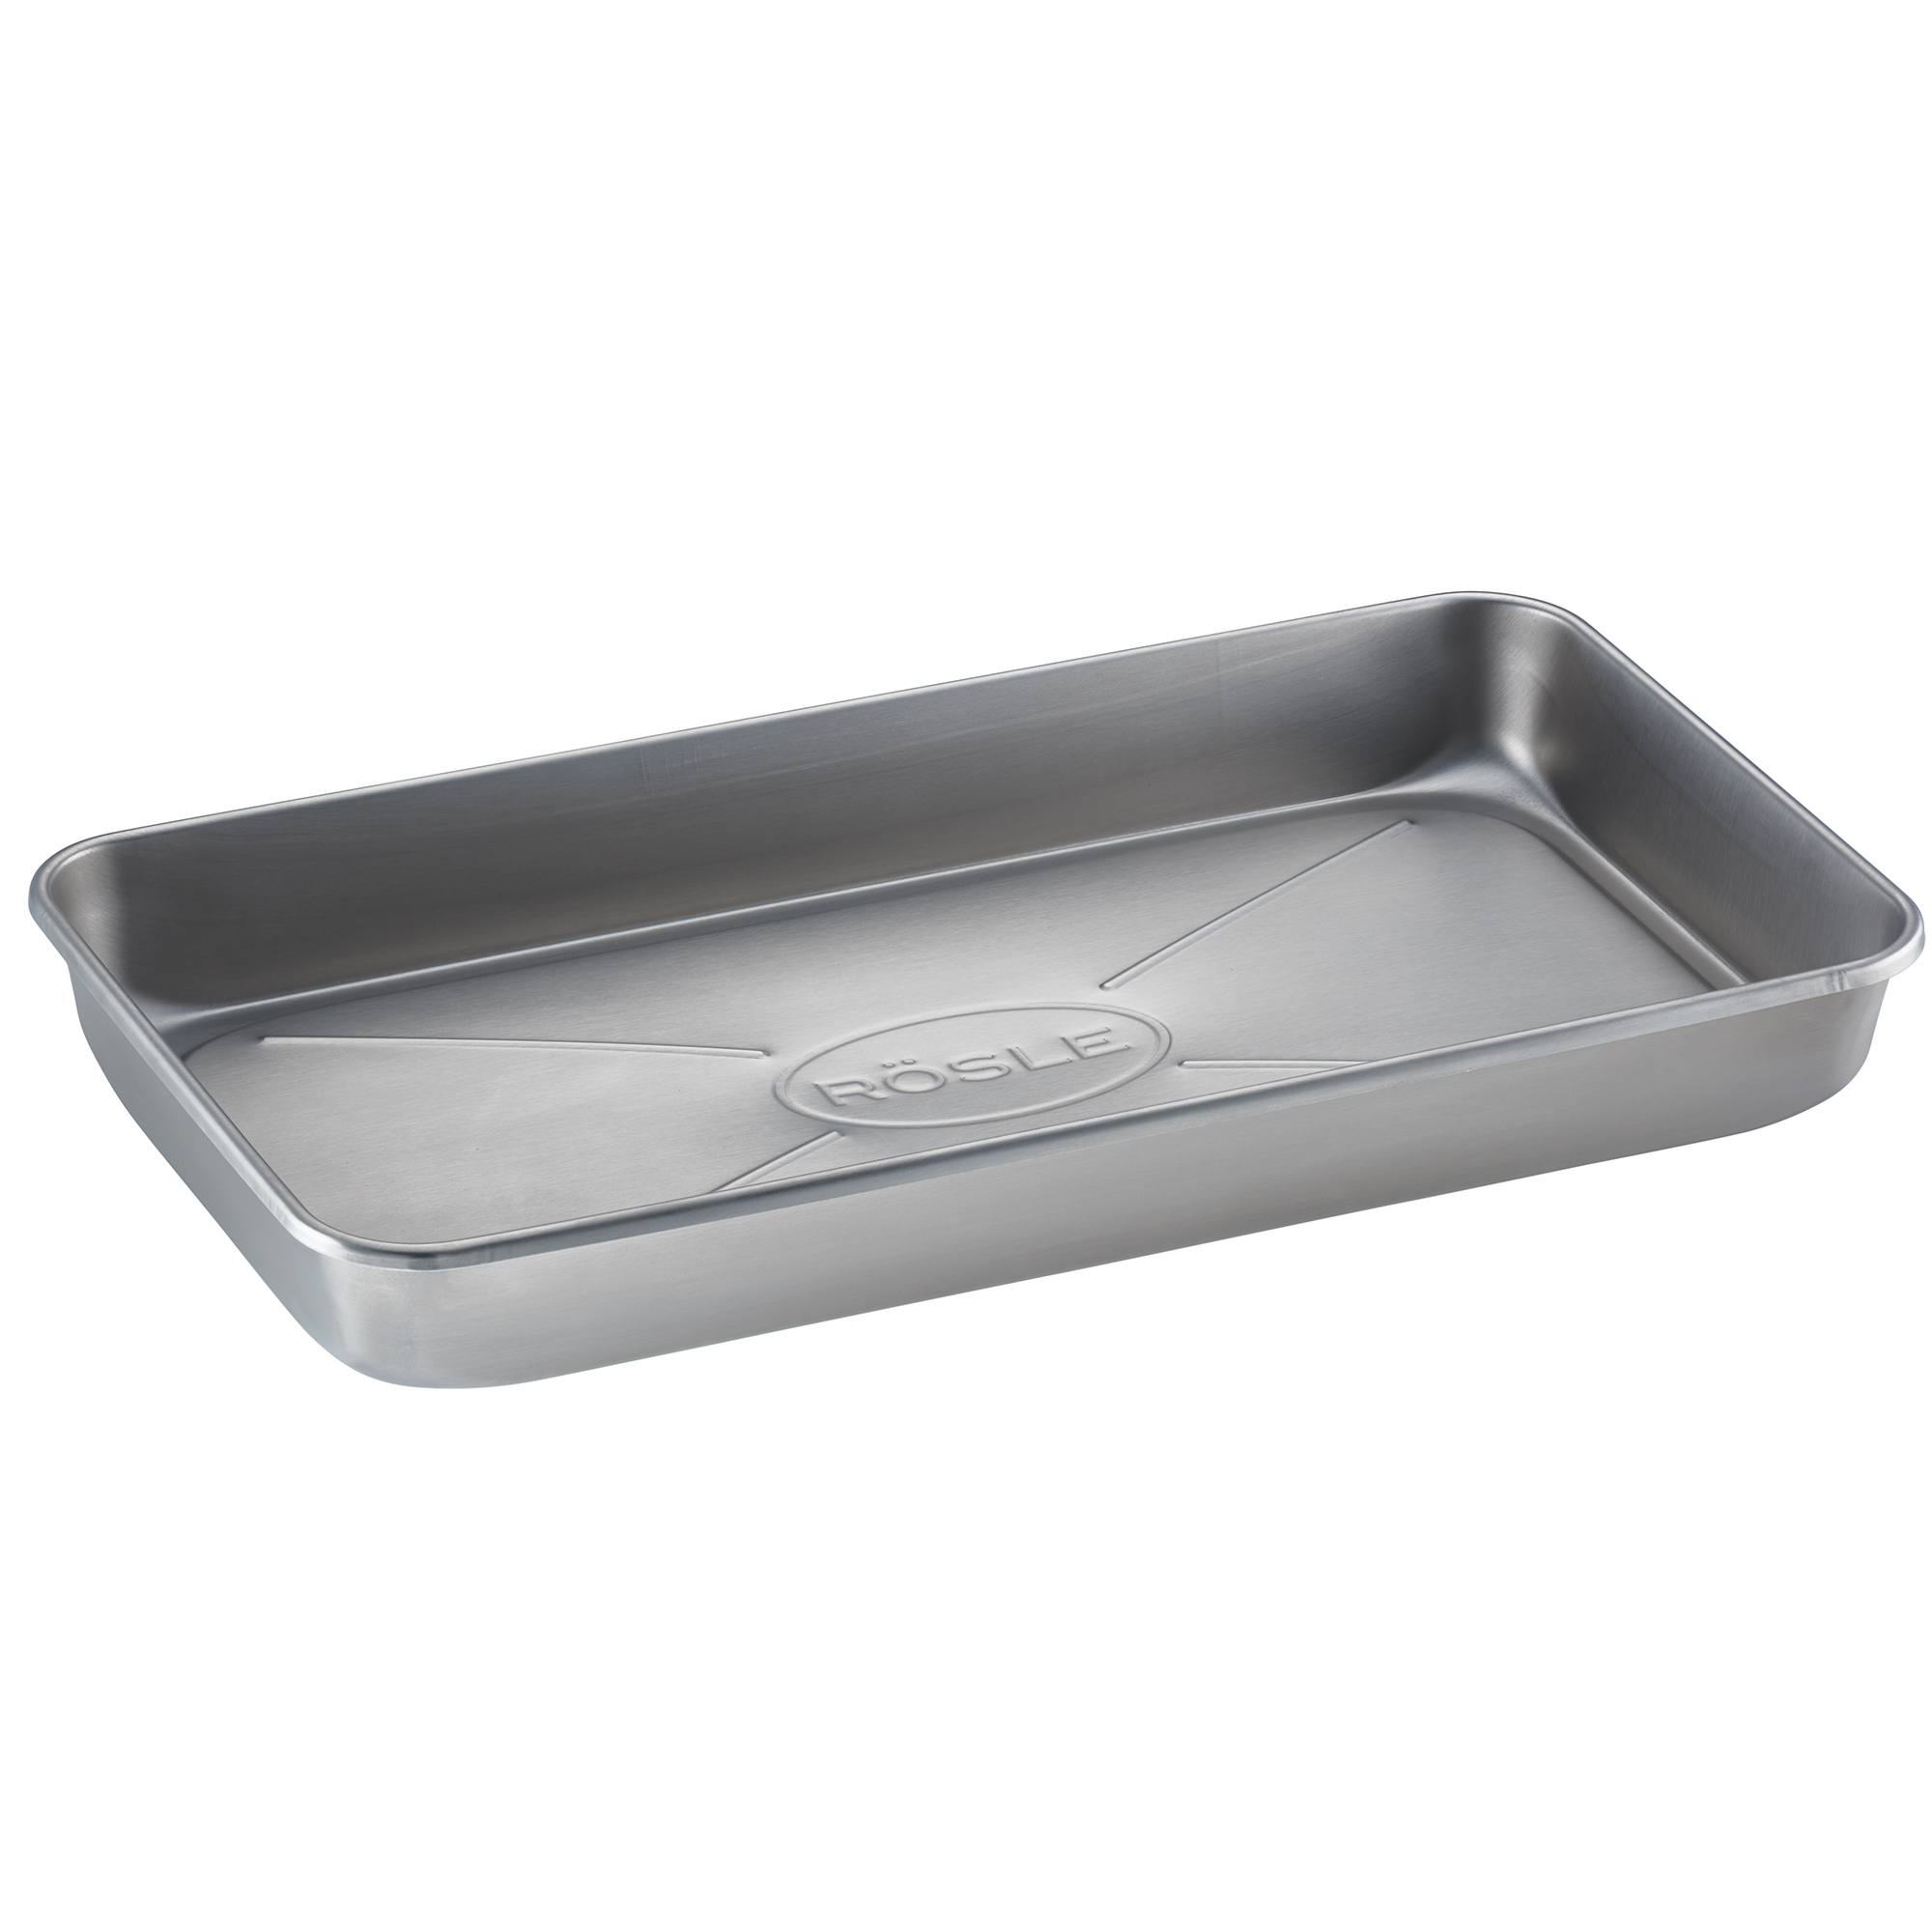 Stainless Steel Universal Pan PRO 41 x 22 cm | 16.1 x 6.7 in.